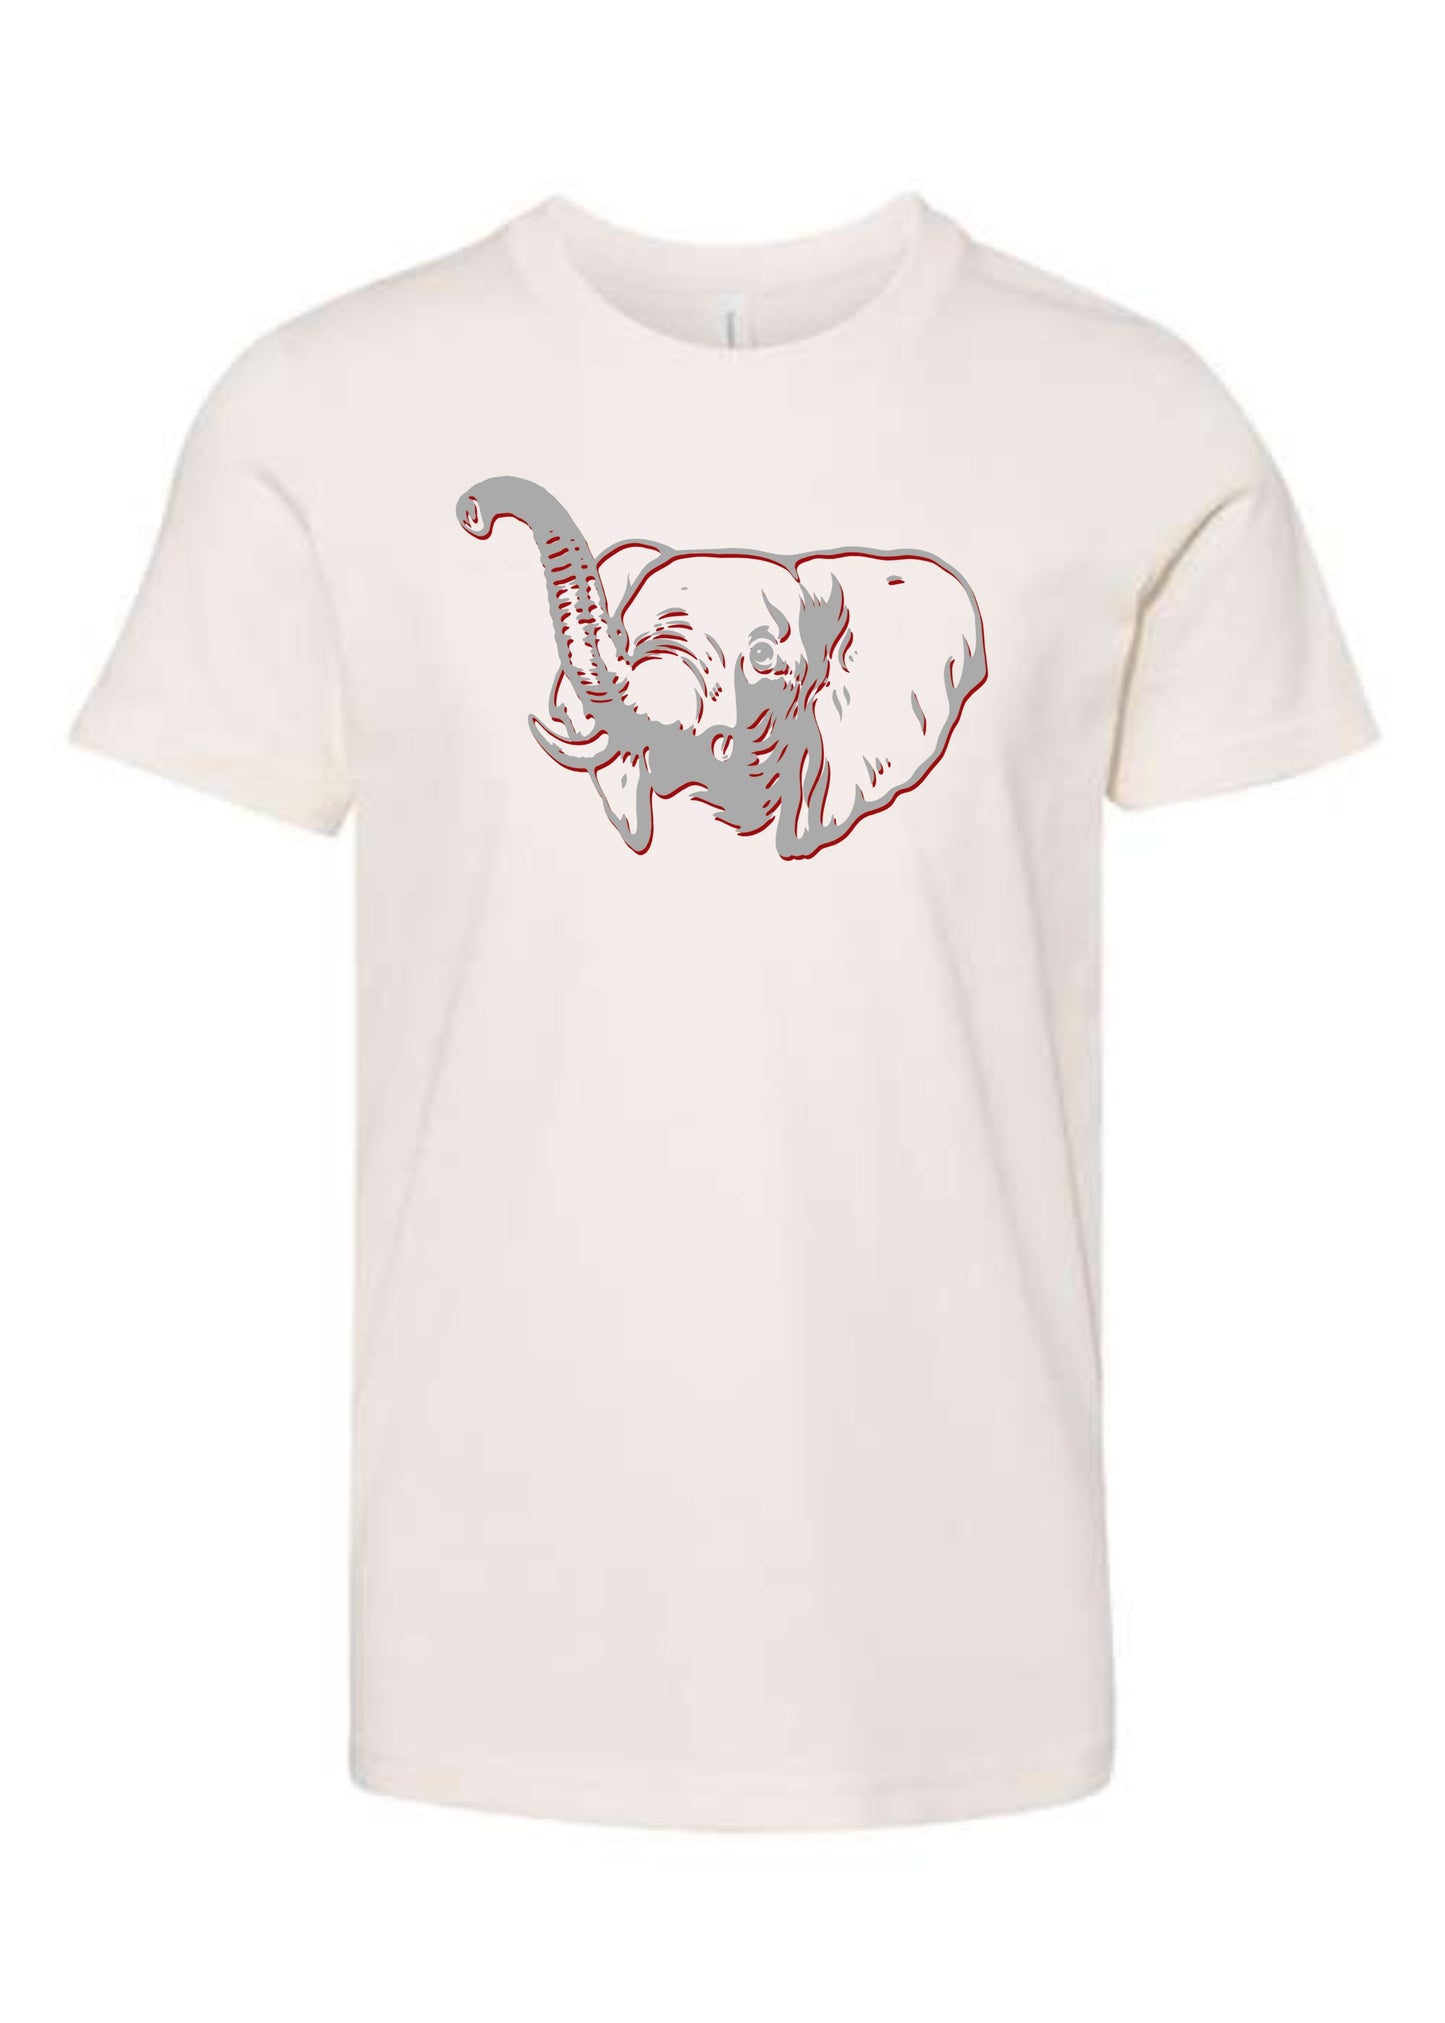 Sketch Elephant | Kids Tee-Kids Tees-Sister Shirts-Sister Shirts, Cute & Custom Tees for Mama & Littles in Trussville, Alabama.